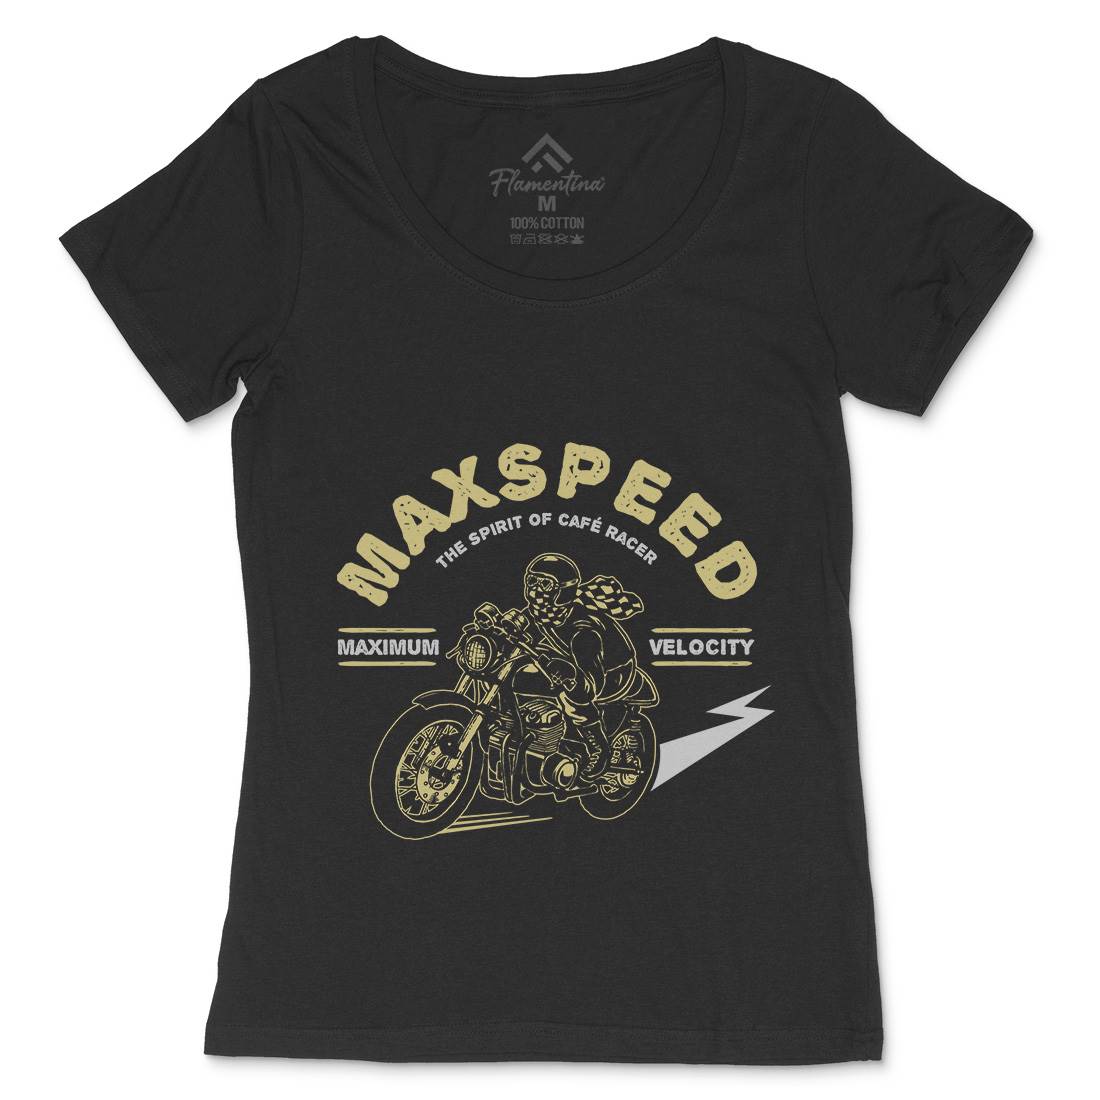 Max Speed Womens Scoop Neck T-Shirt Motorcycles A343